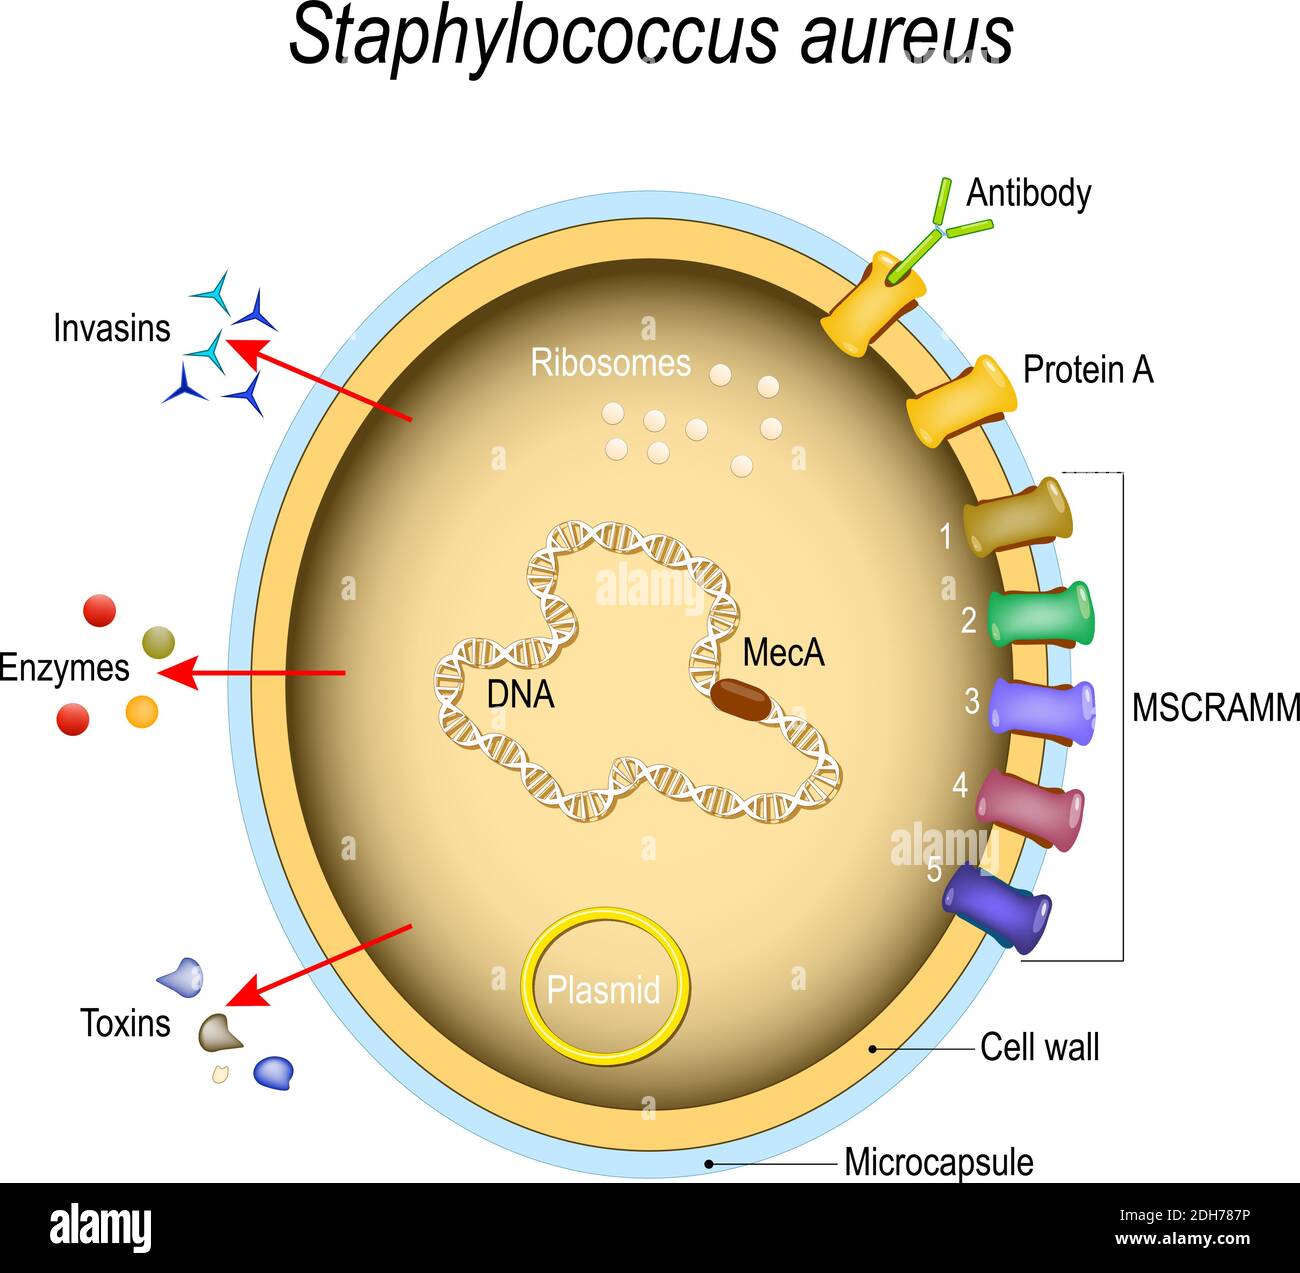 Staphylococcus aureus cell structure and pathogenic factors. Cell components. vector illustration for medical, educational and science use Stock Vector